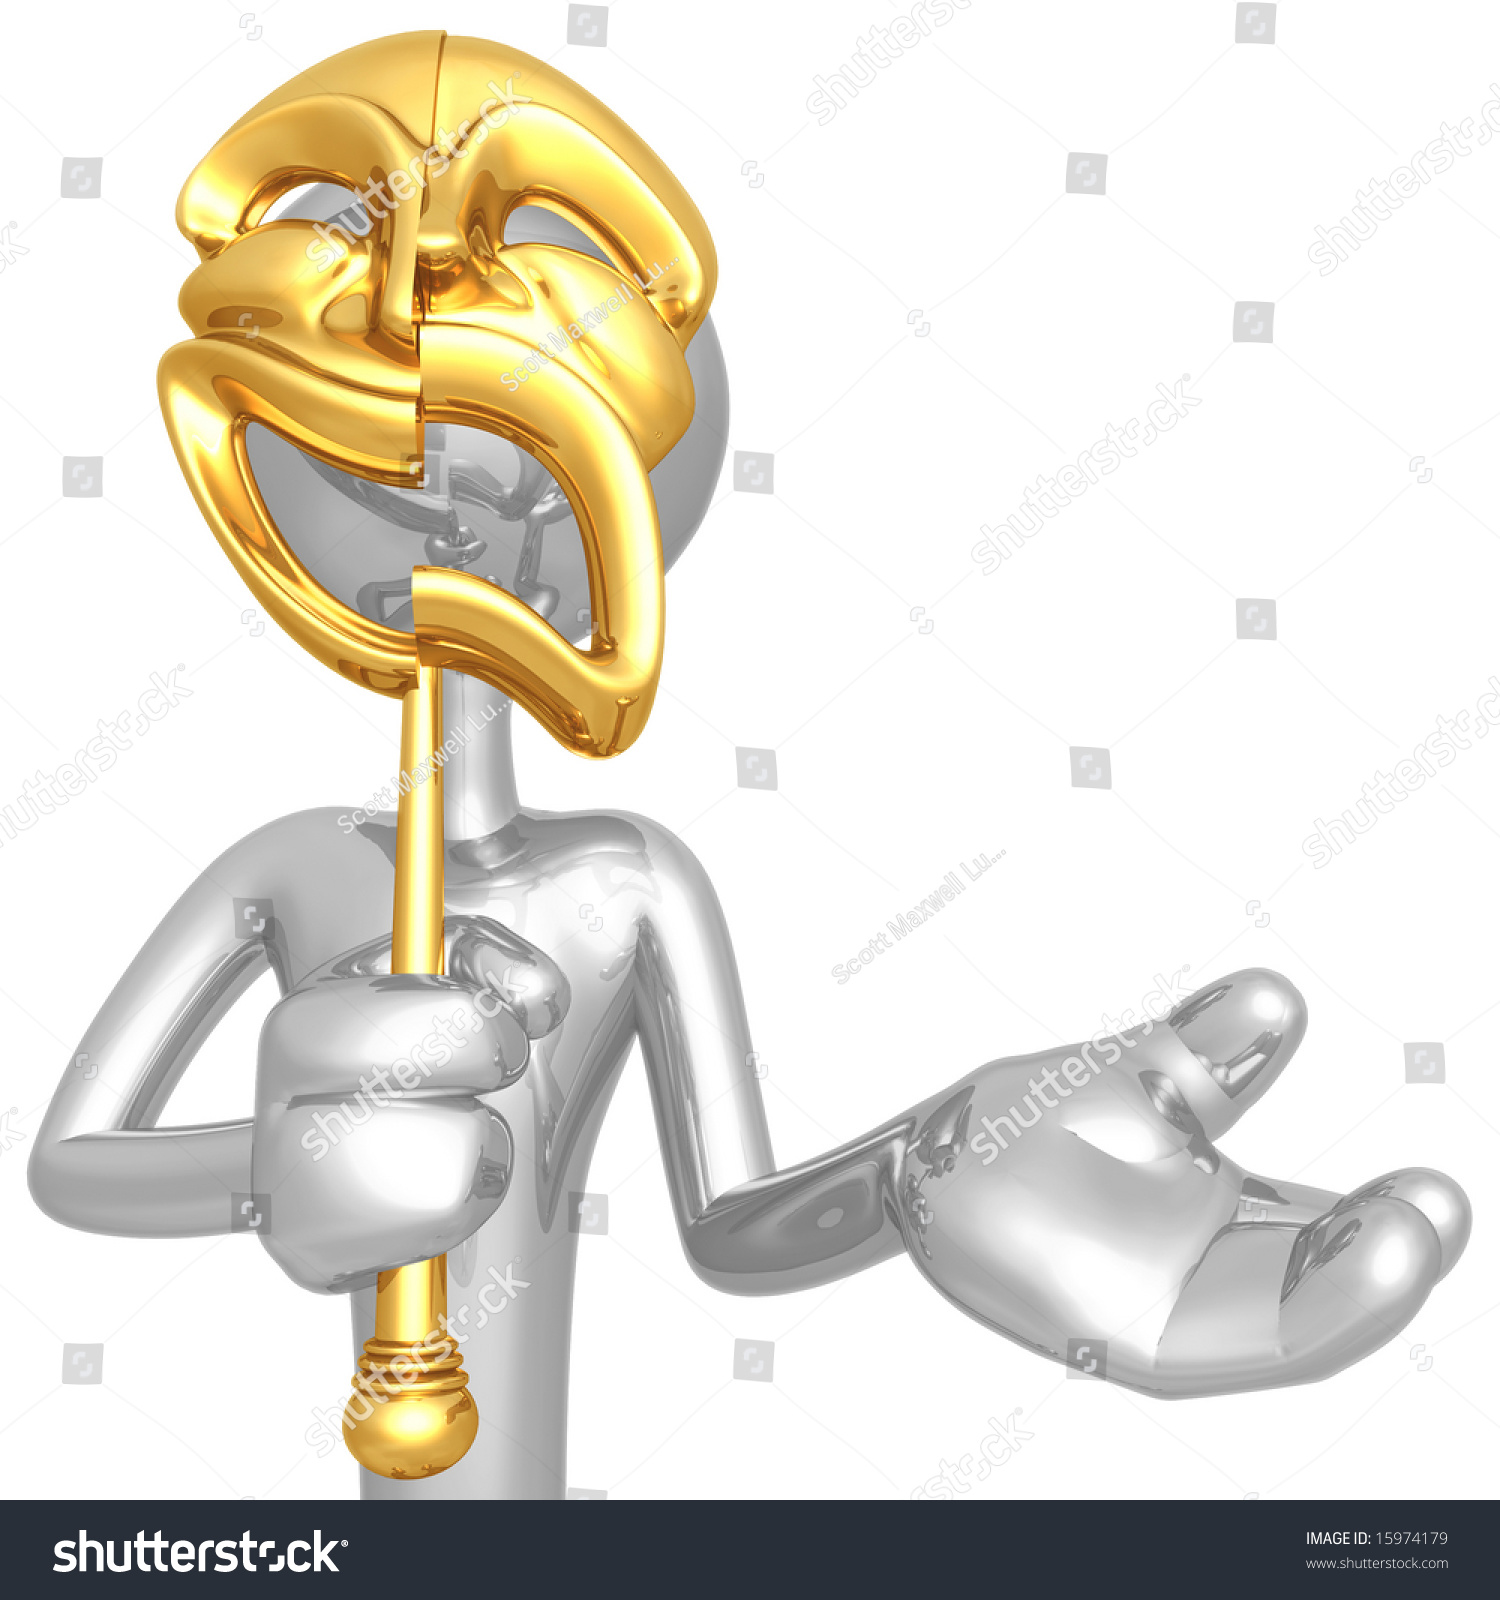 Mixed Emotions Stock Photo 15974179 : Shutterstock